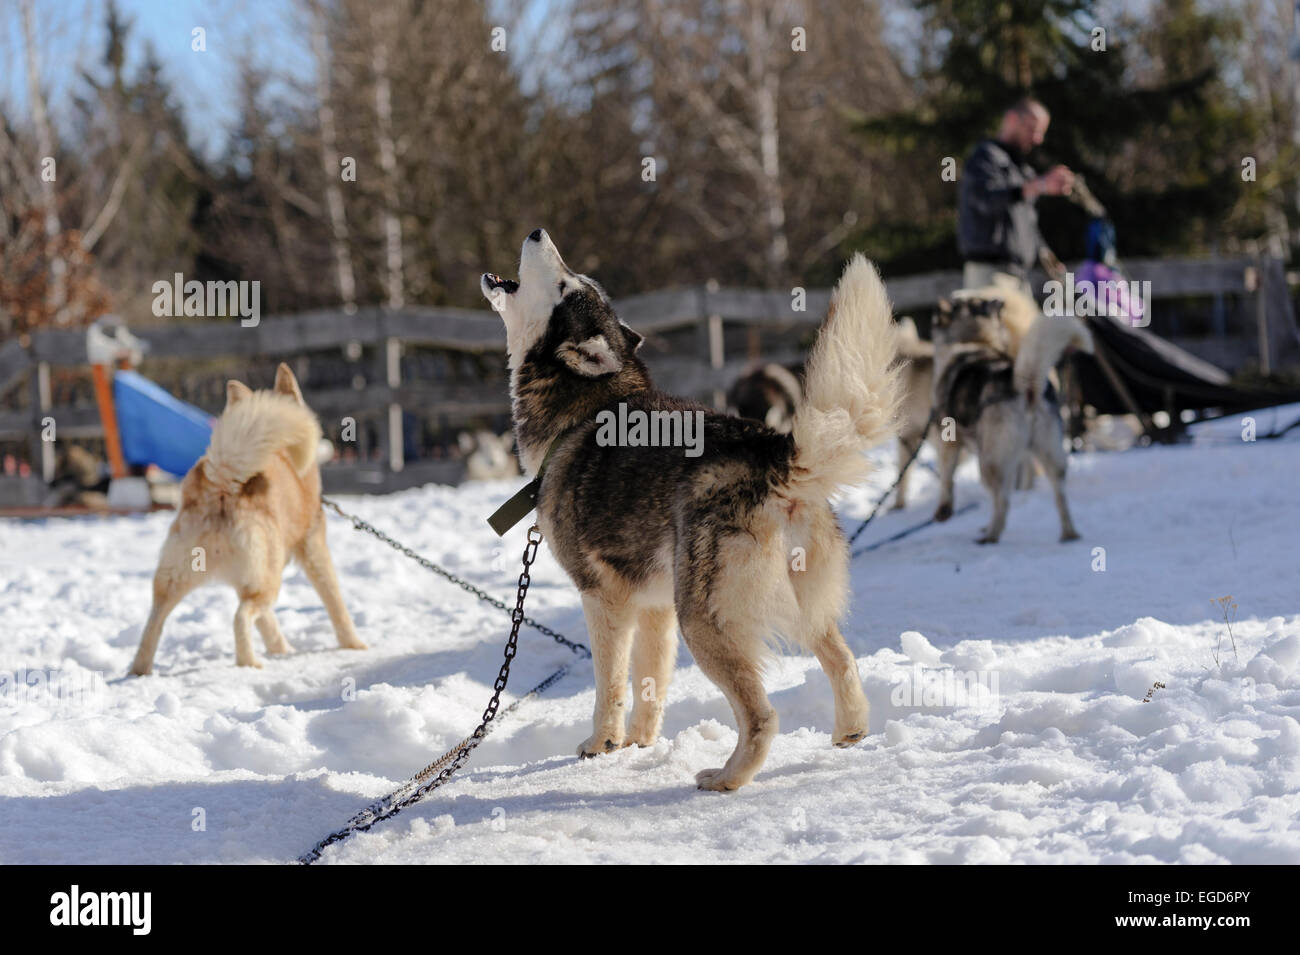 Howling siberian husky dogs before start at a sled dog race in Romania, Transylvania. Stock Photo